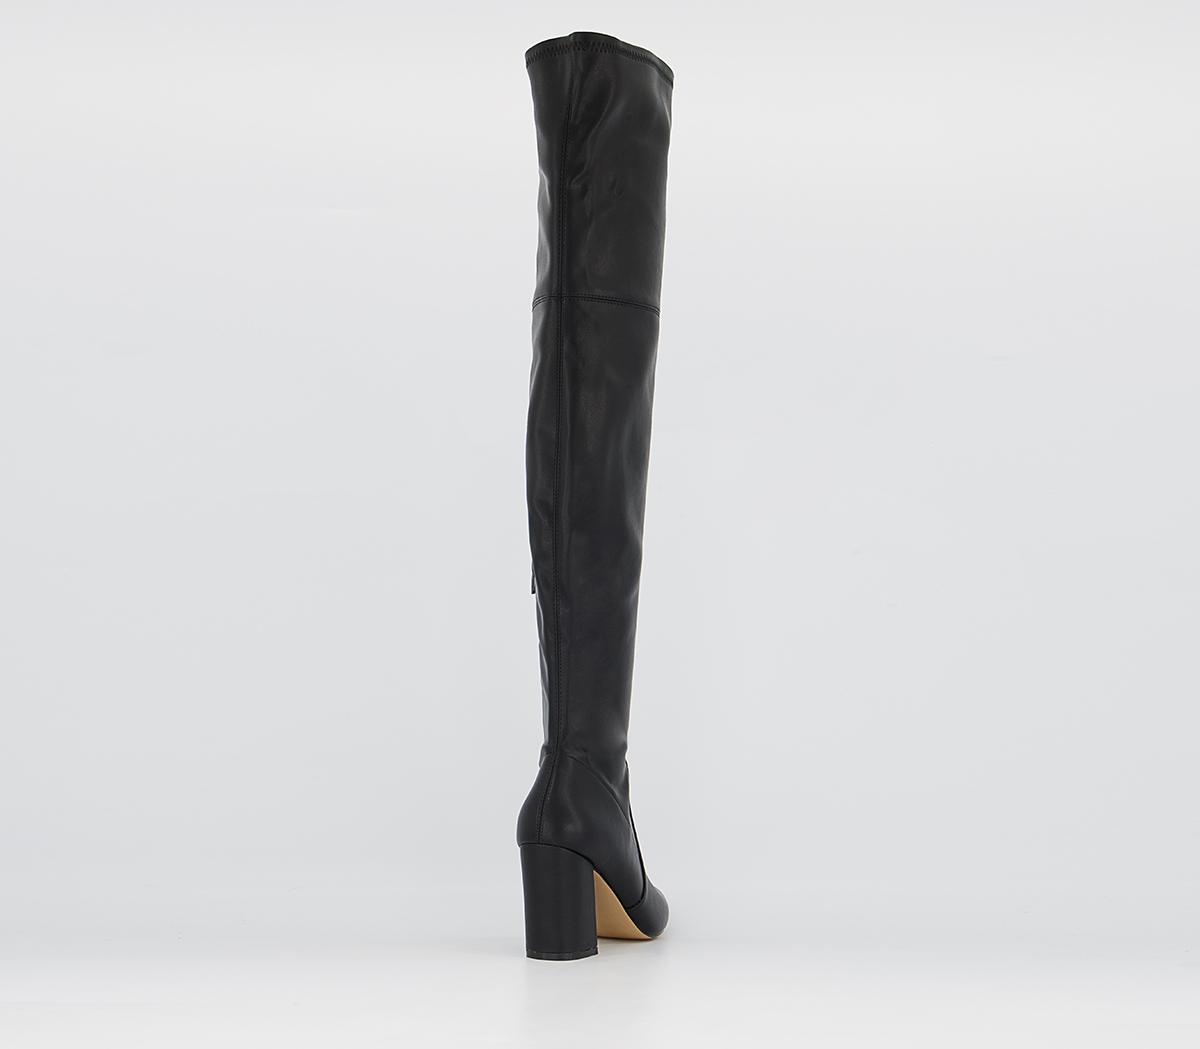 OFFICE Klass Stretch Over The Knee Boots Black - Knee High Boots